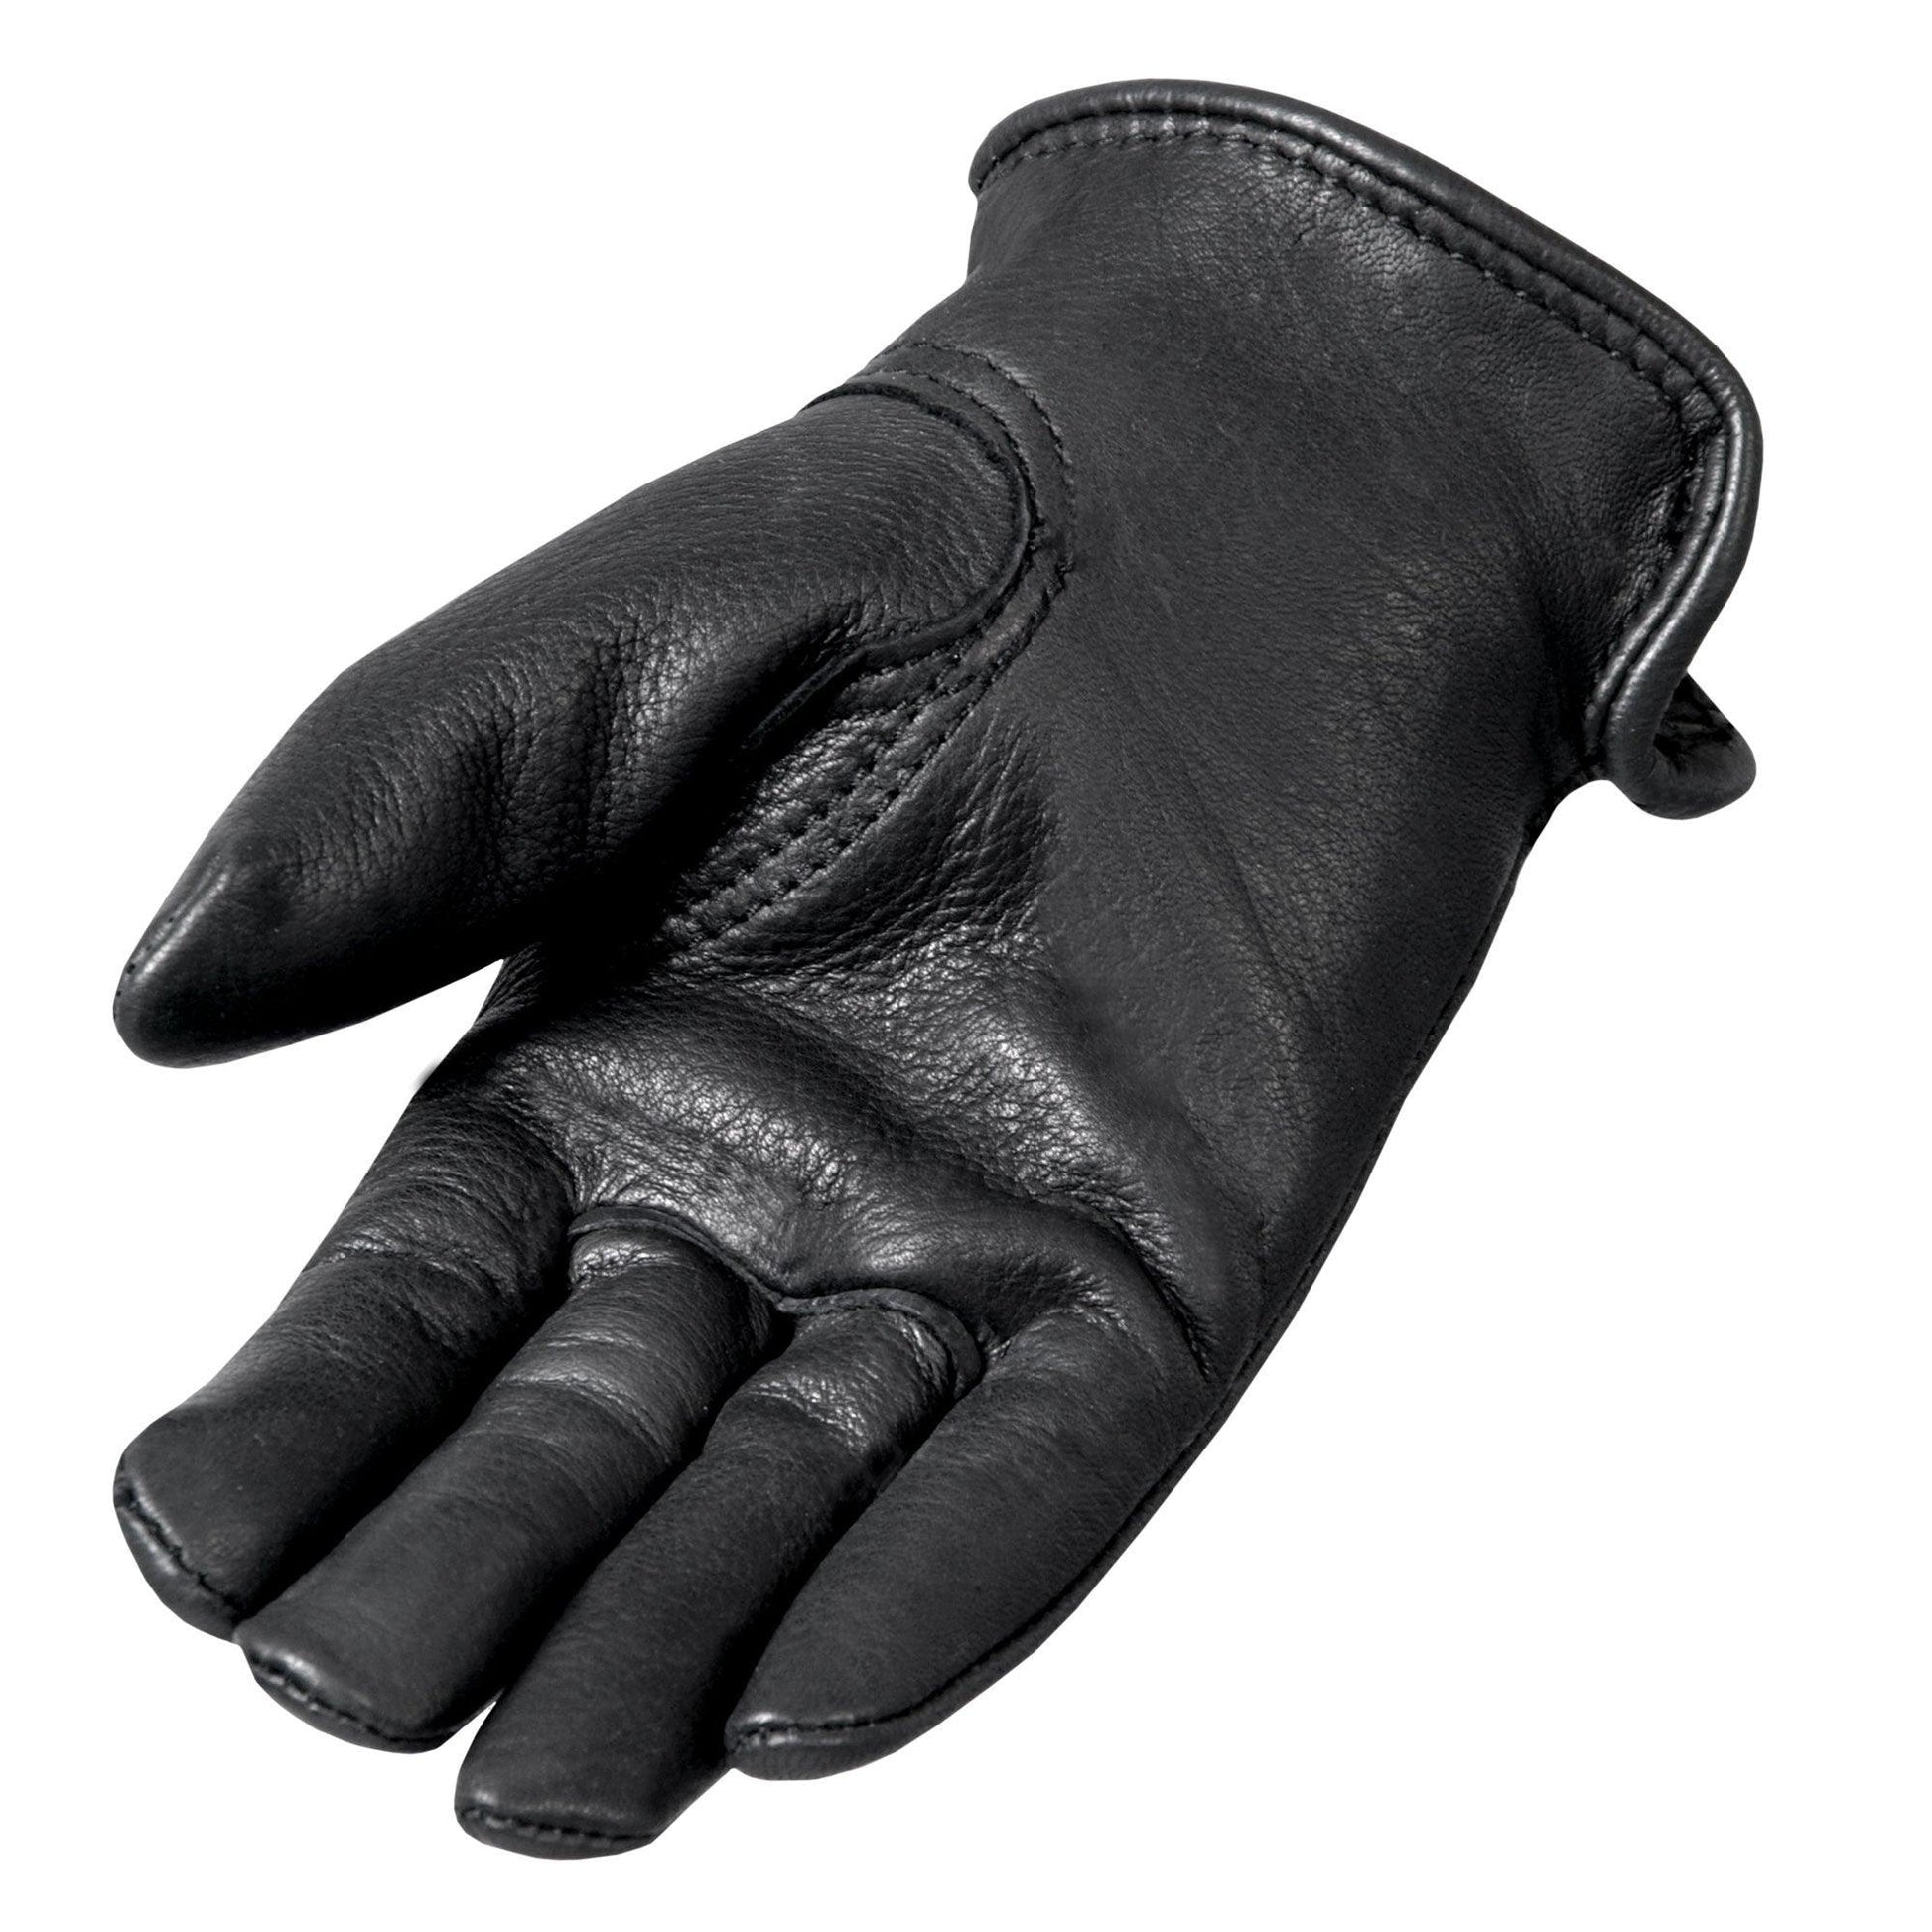 Classic Deerskin Driving Motorcycle Gloves - Military Republic